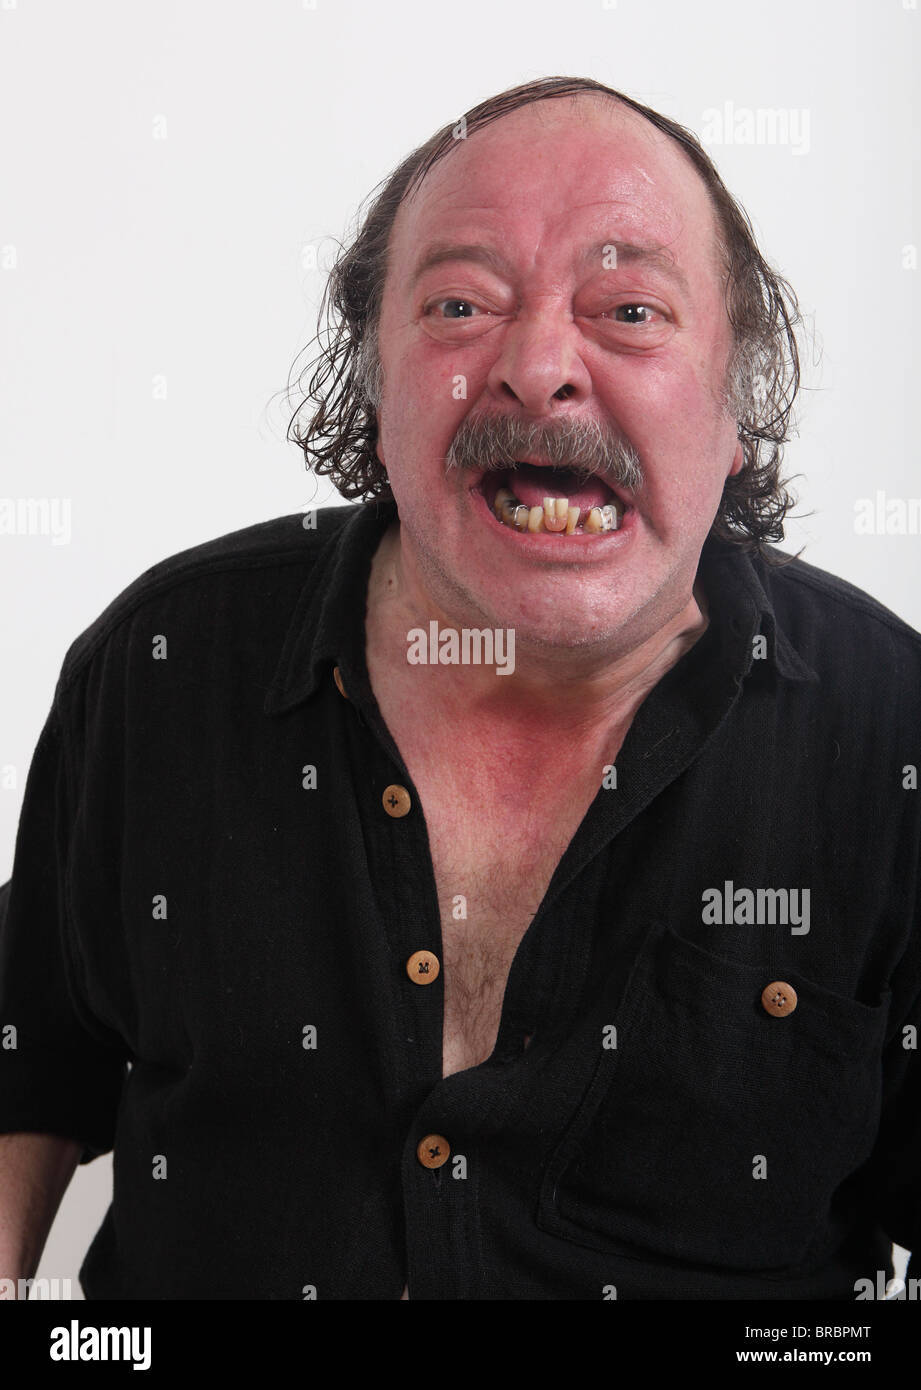 Homeless caucasian fat character portrait with bad teeth, looking aggressively into the camera Stock Photo